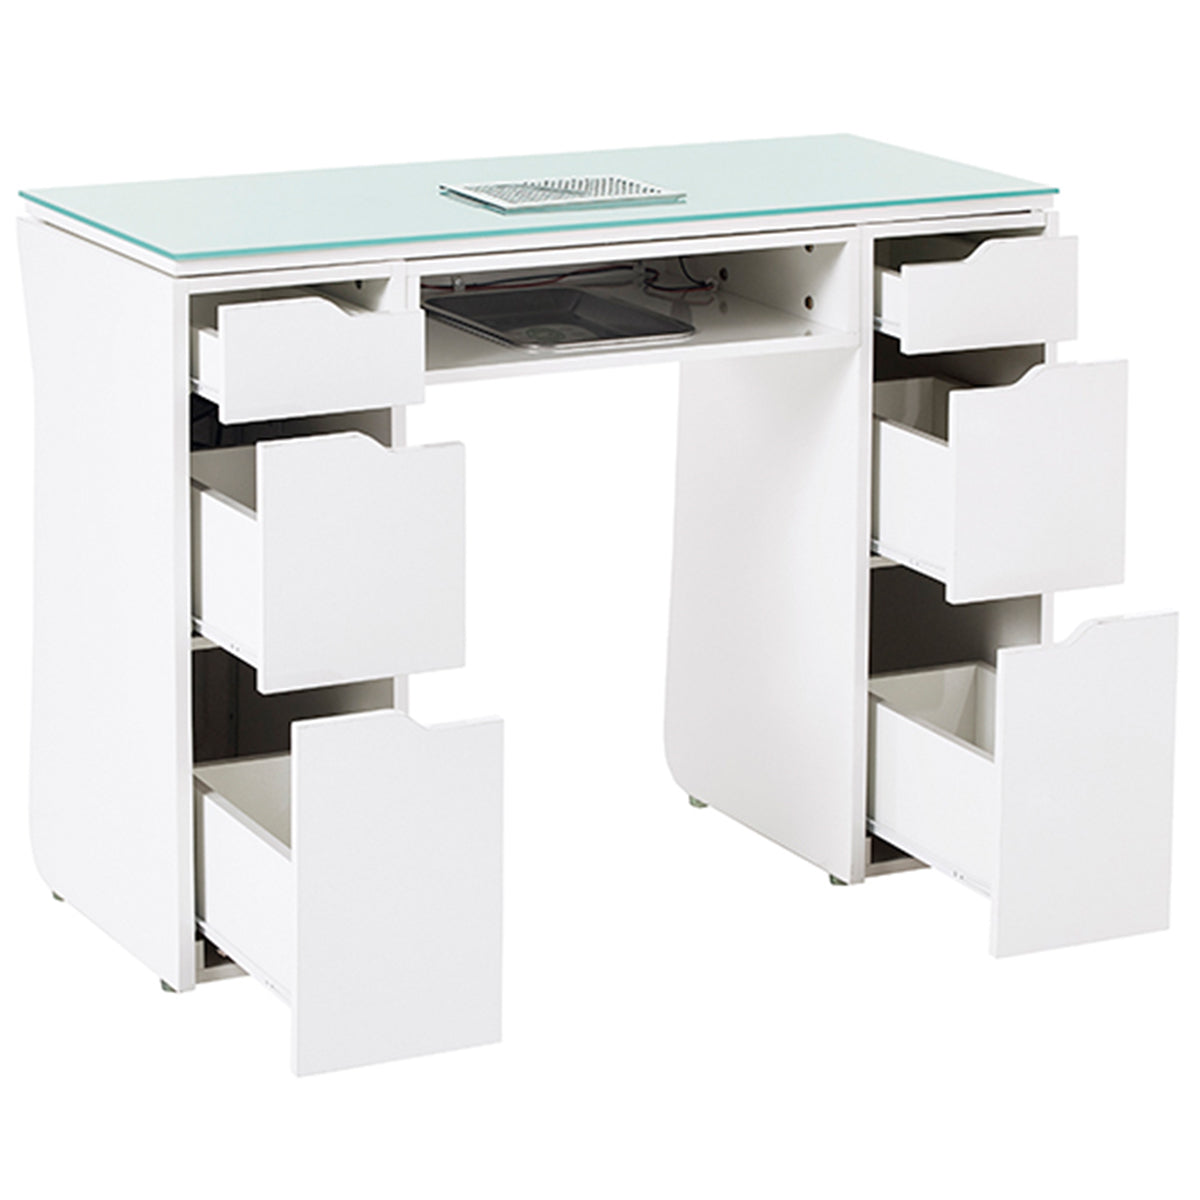 VICKI Manicure Nail Table - White - Drawers Open